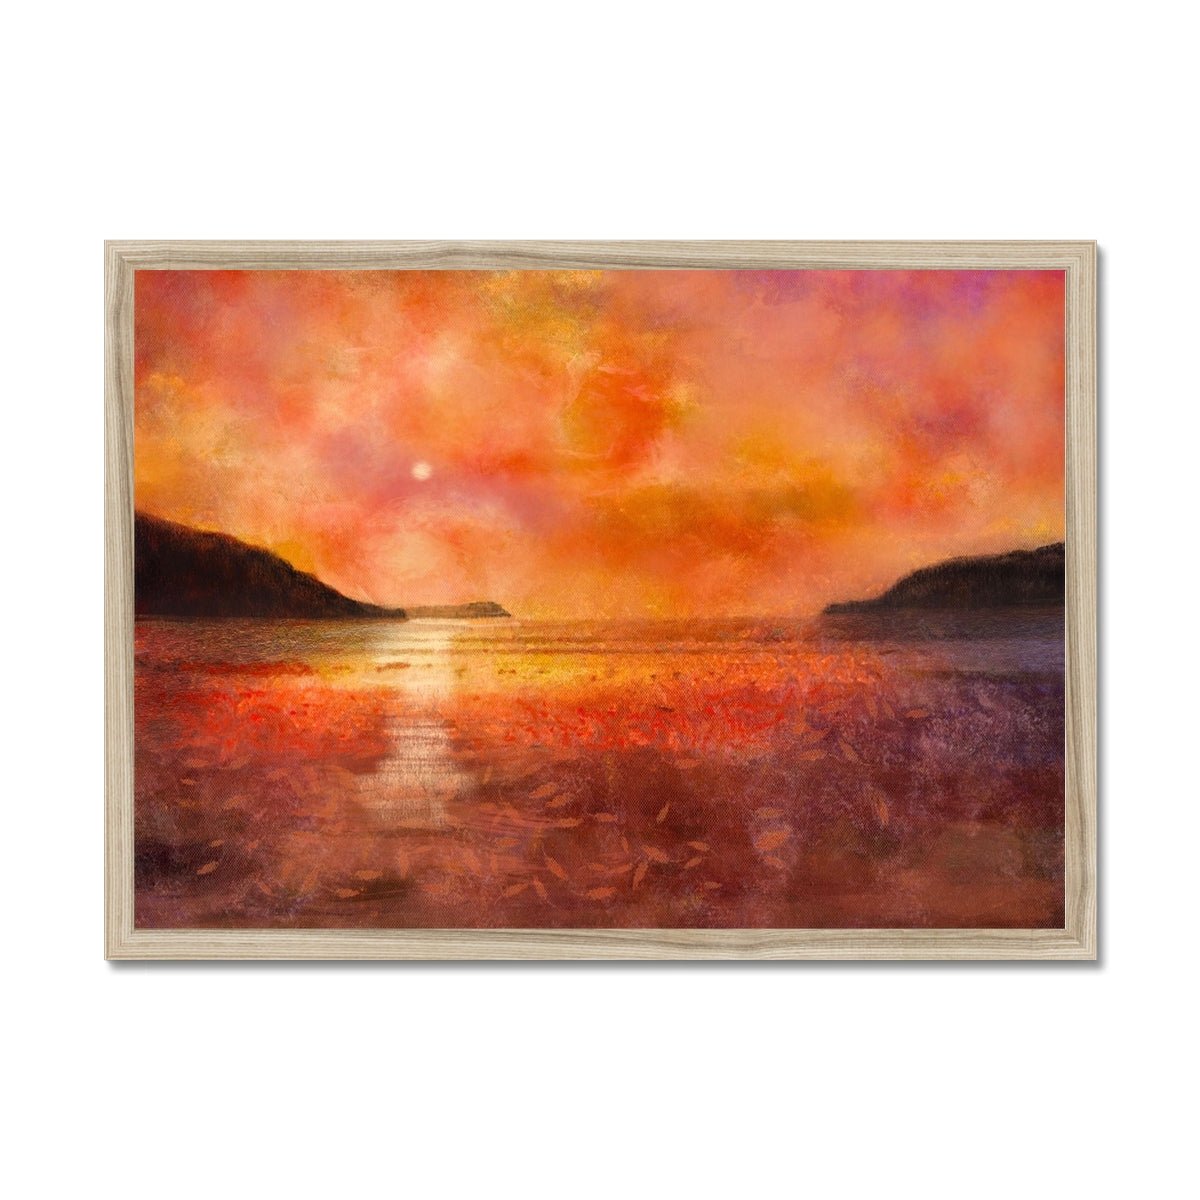 Calgary Beach Sunset Mull Painting | Framed Prints From Scotland-Framed Prints-Hebridean Islands Art Gallery-A2 Landscape-Natural Frame-Paintings, Prints, Homeware, Art Gifts From Scotland By Scottish Artist Kevin Hunter